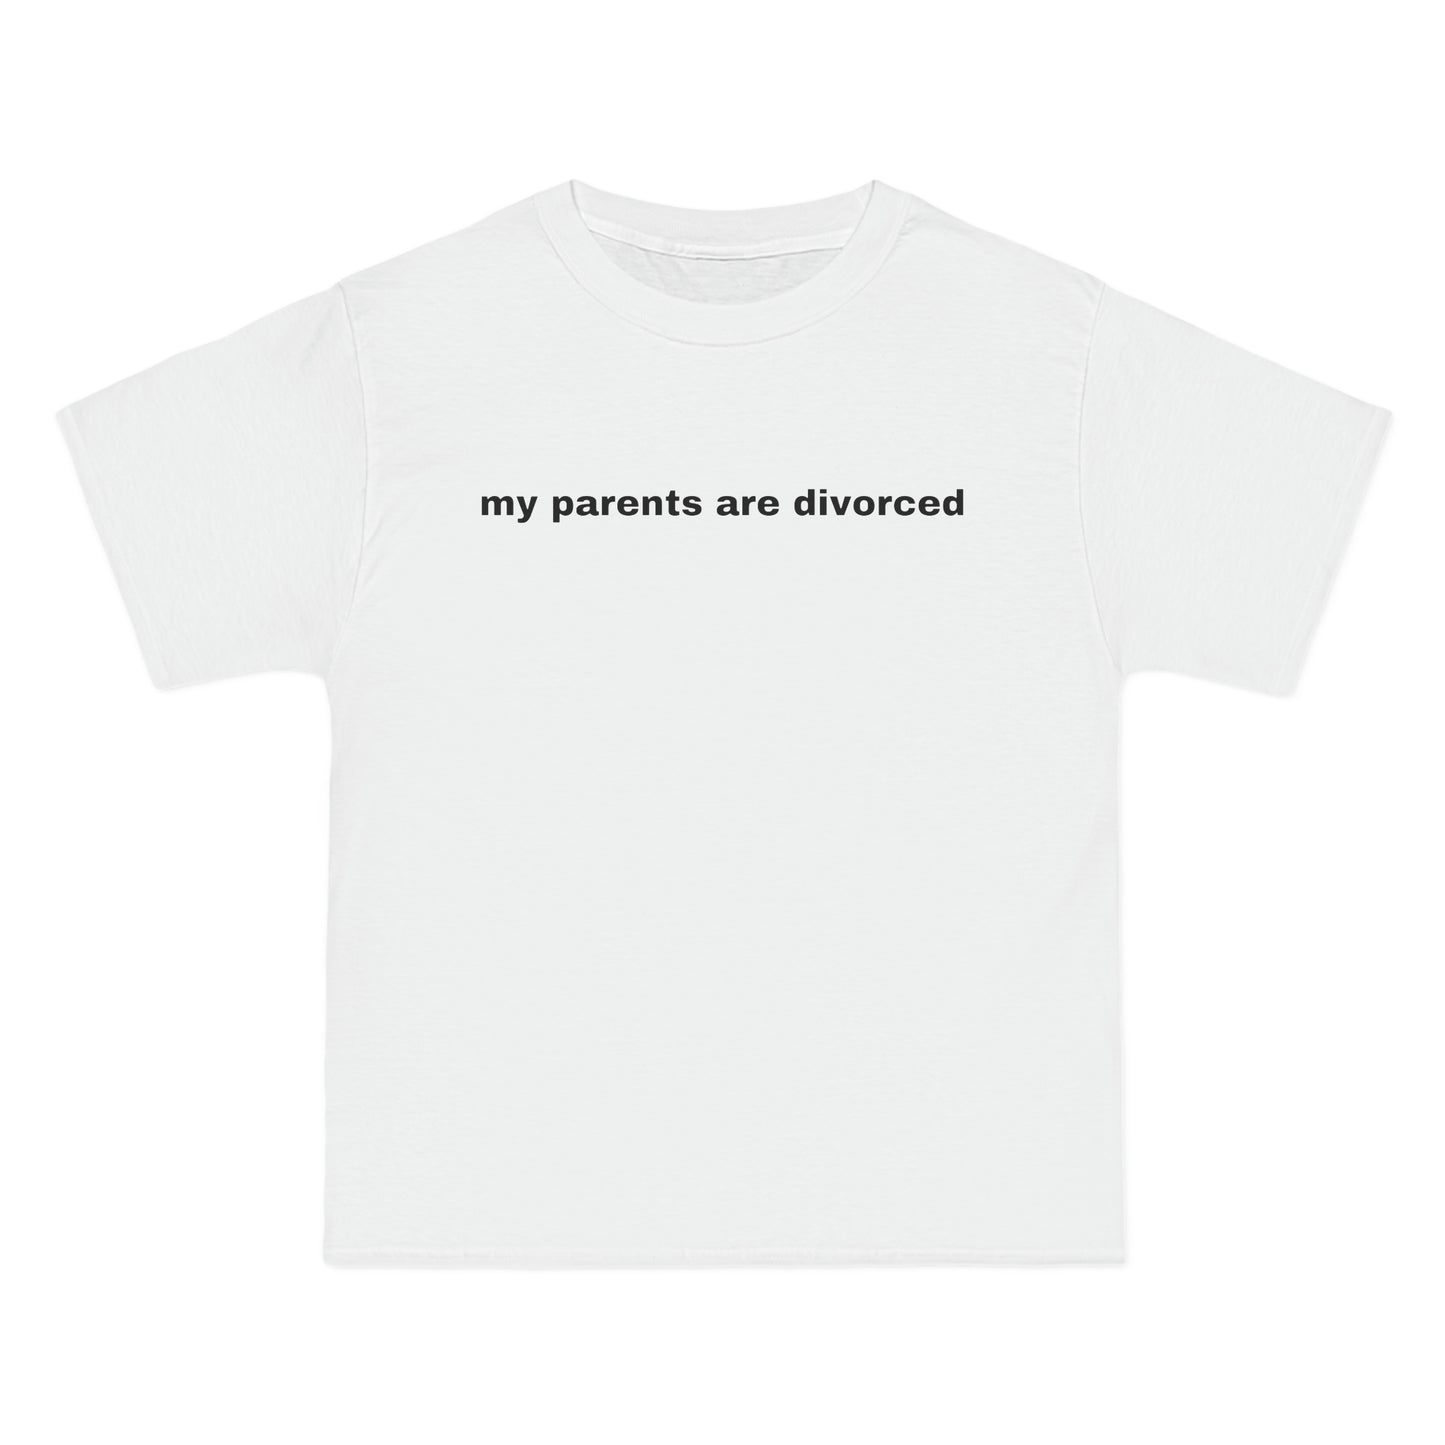 my parents are divorced Tee